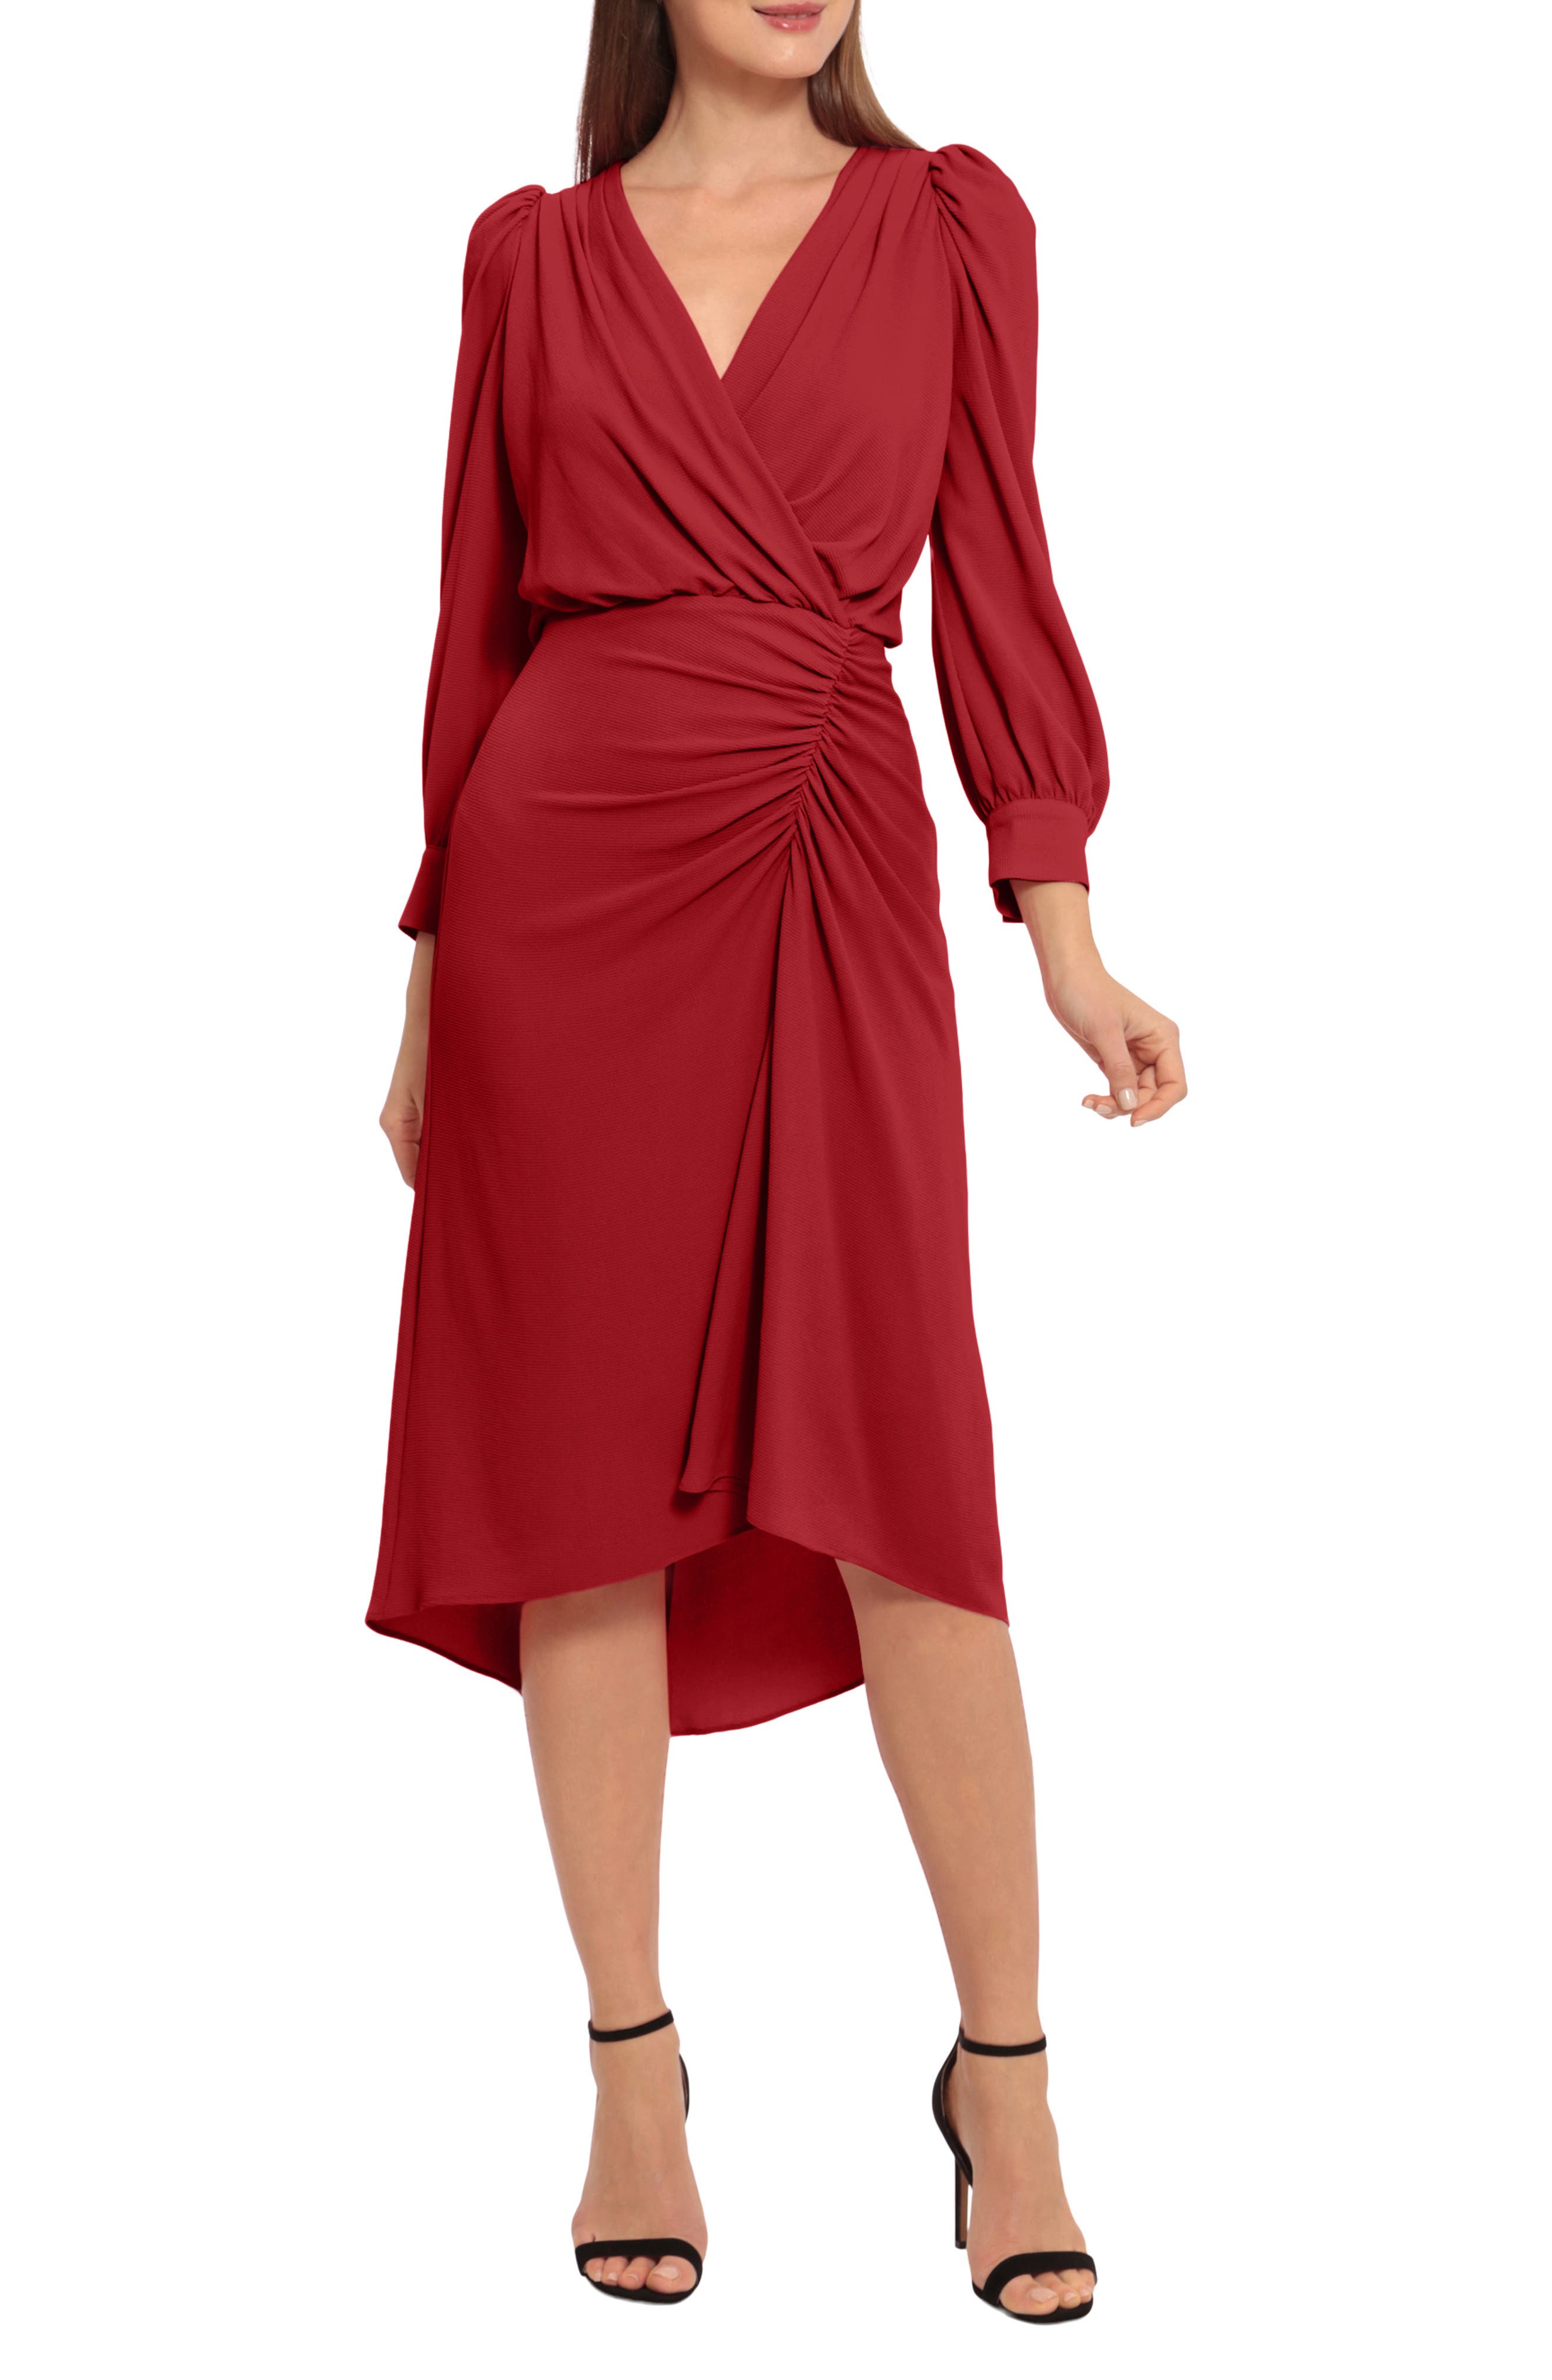 Vintage Cocktail Dresses, Party Dresses, Prom Dresses Maggy London Ruched Long Sleeve High-Low Midi Dress in Equestrian Red at Nordstrom Rack Size 14 $79.97 AT vintagedancer.com